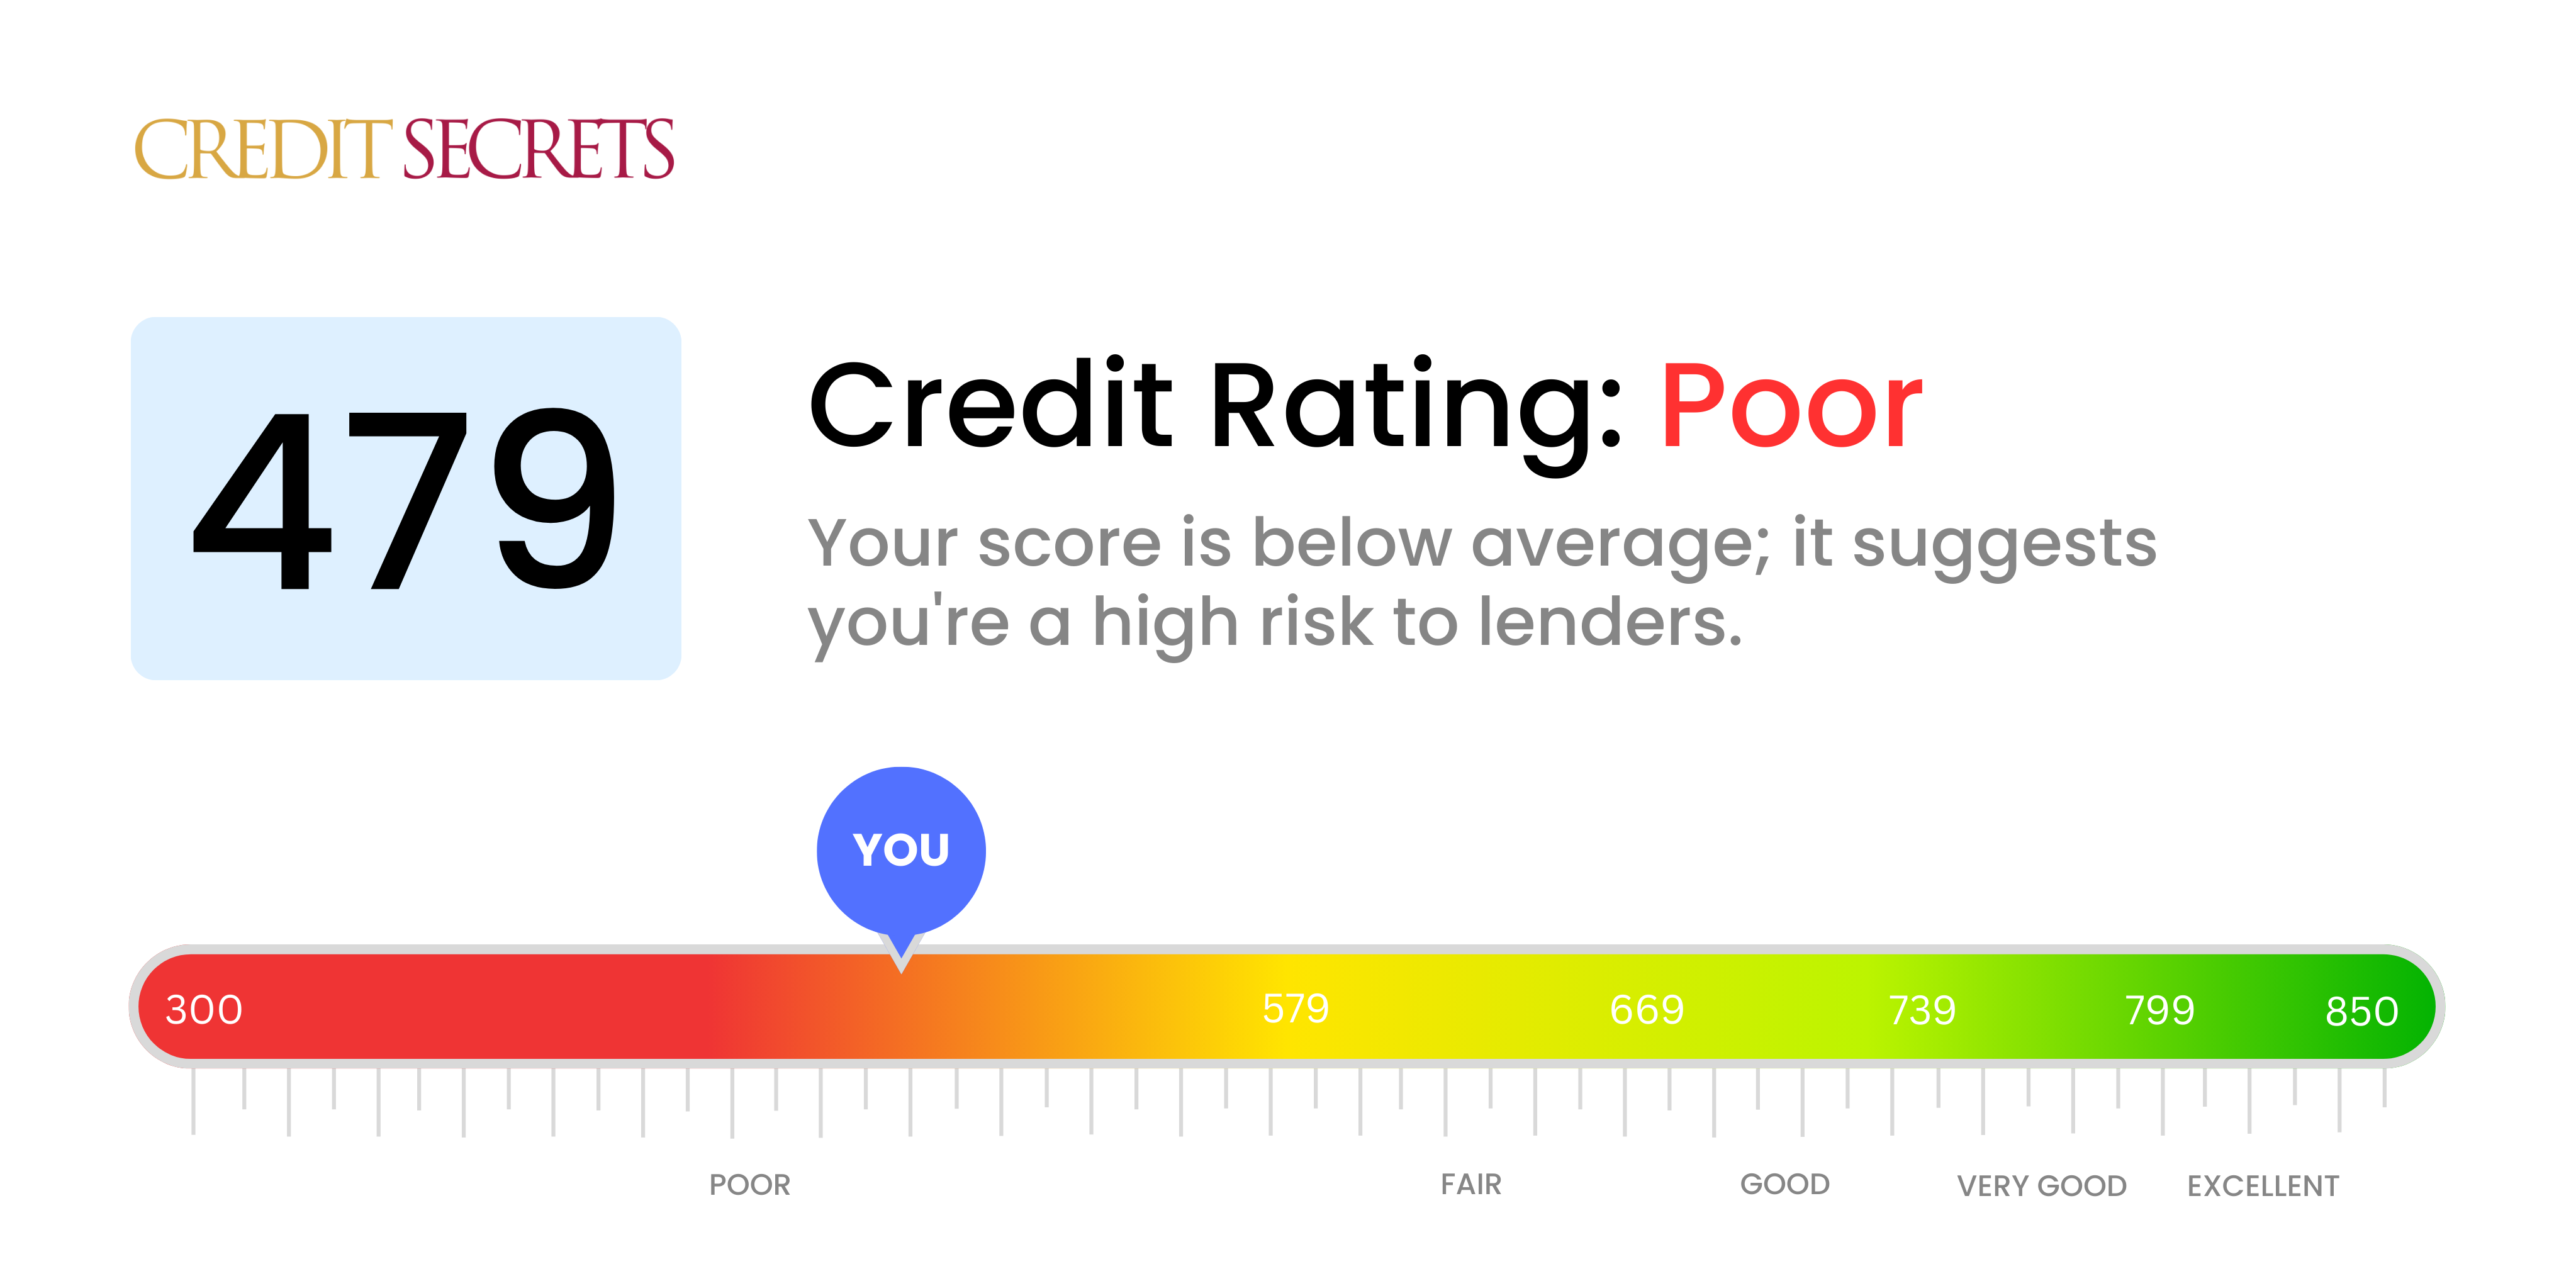 Is 479 a good credit score?